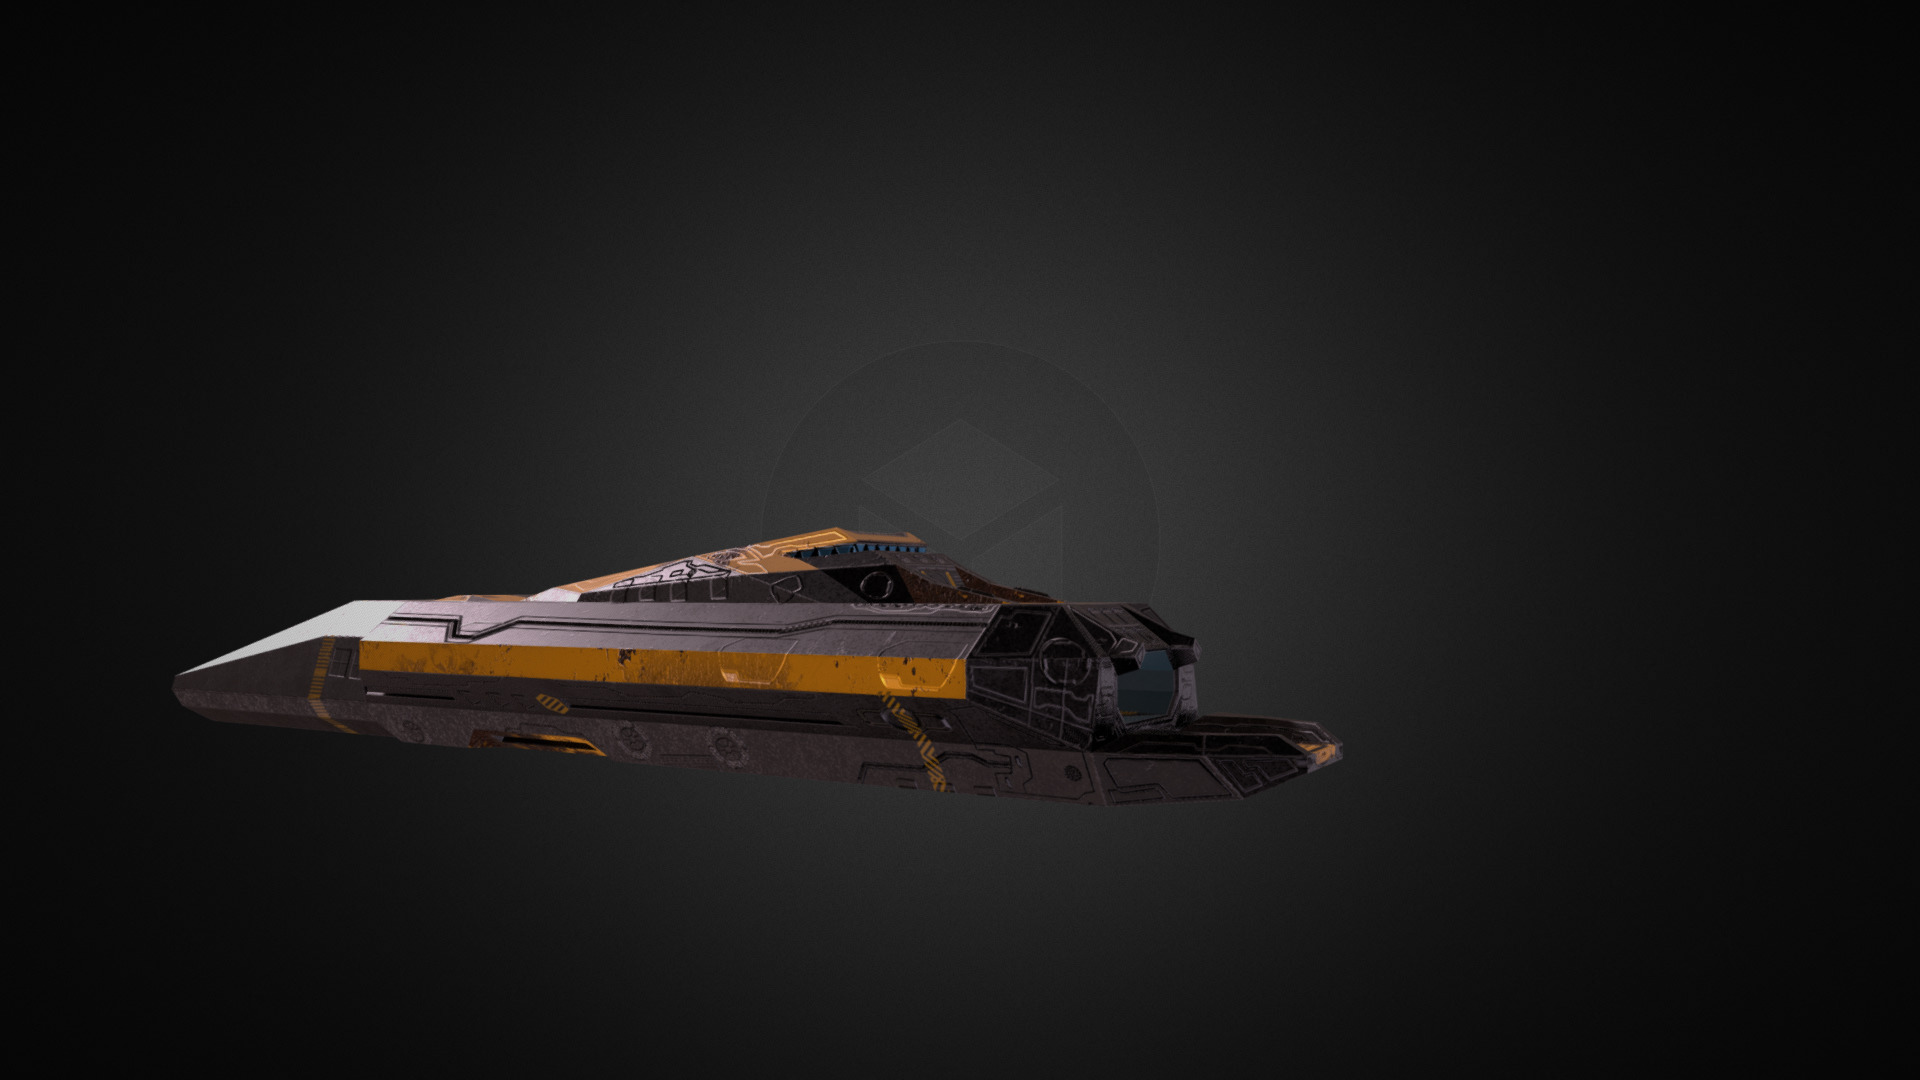 3D model Sci-fi battleship - This is a 3D model of the Sci-fi battleship. The 3D model is about a yellow and black jet.